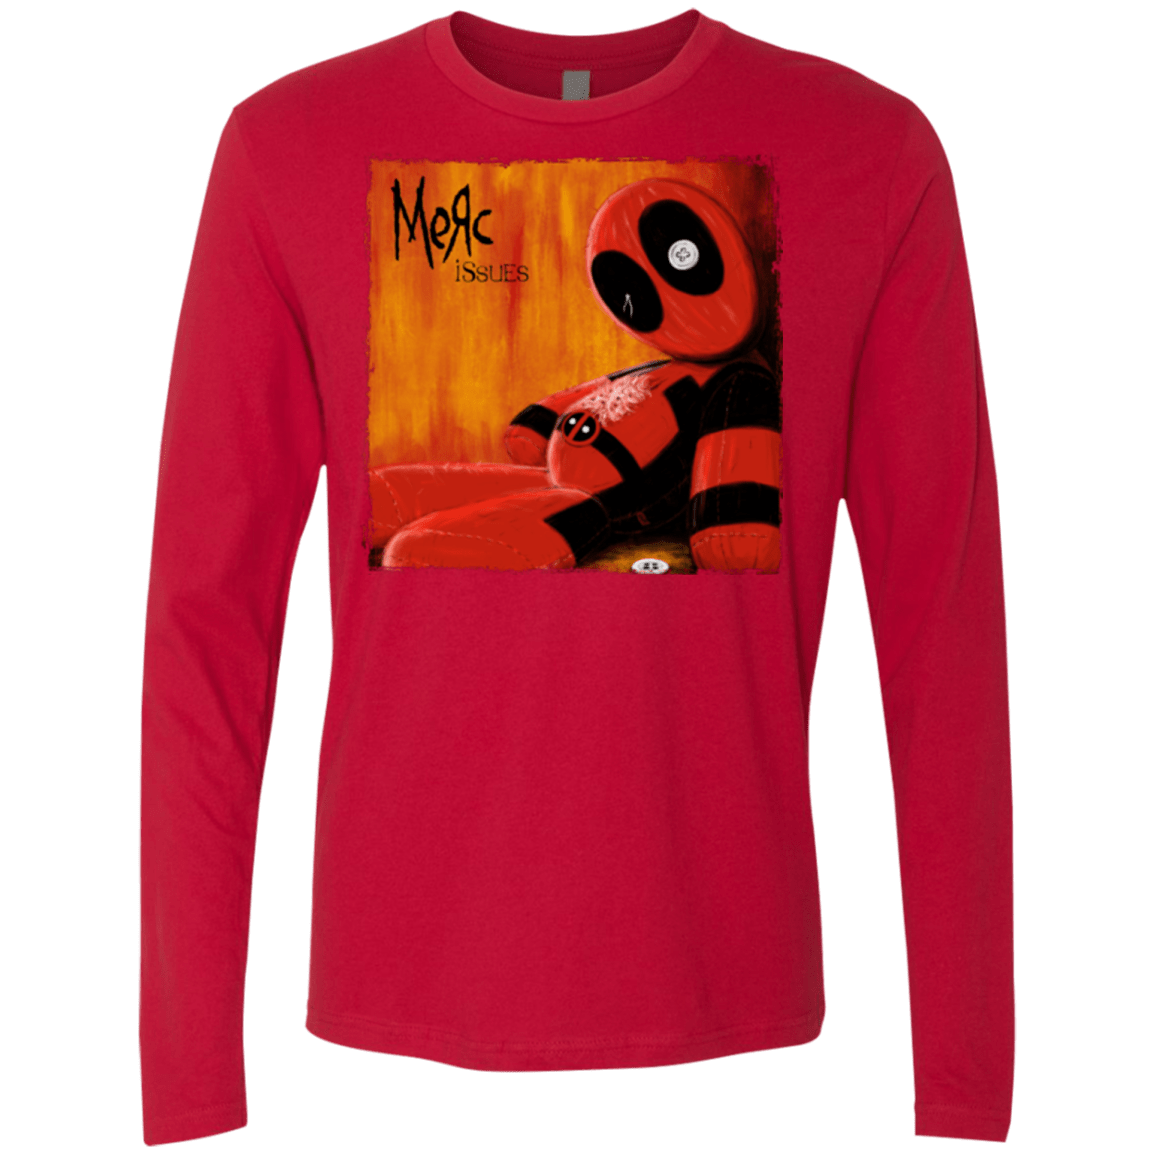 T-Shirts Red / Small Issues Men's Premium Long Sleeve